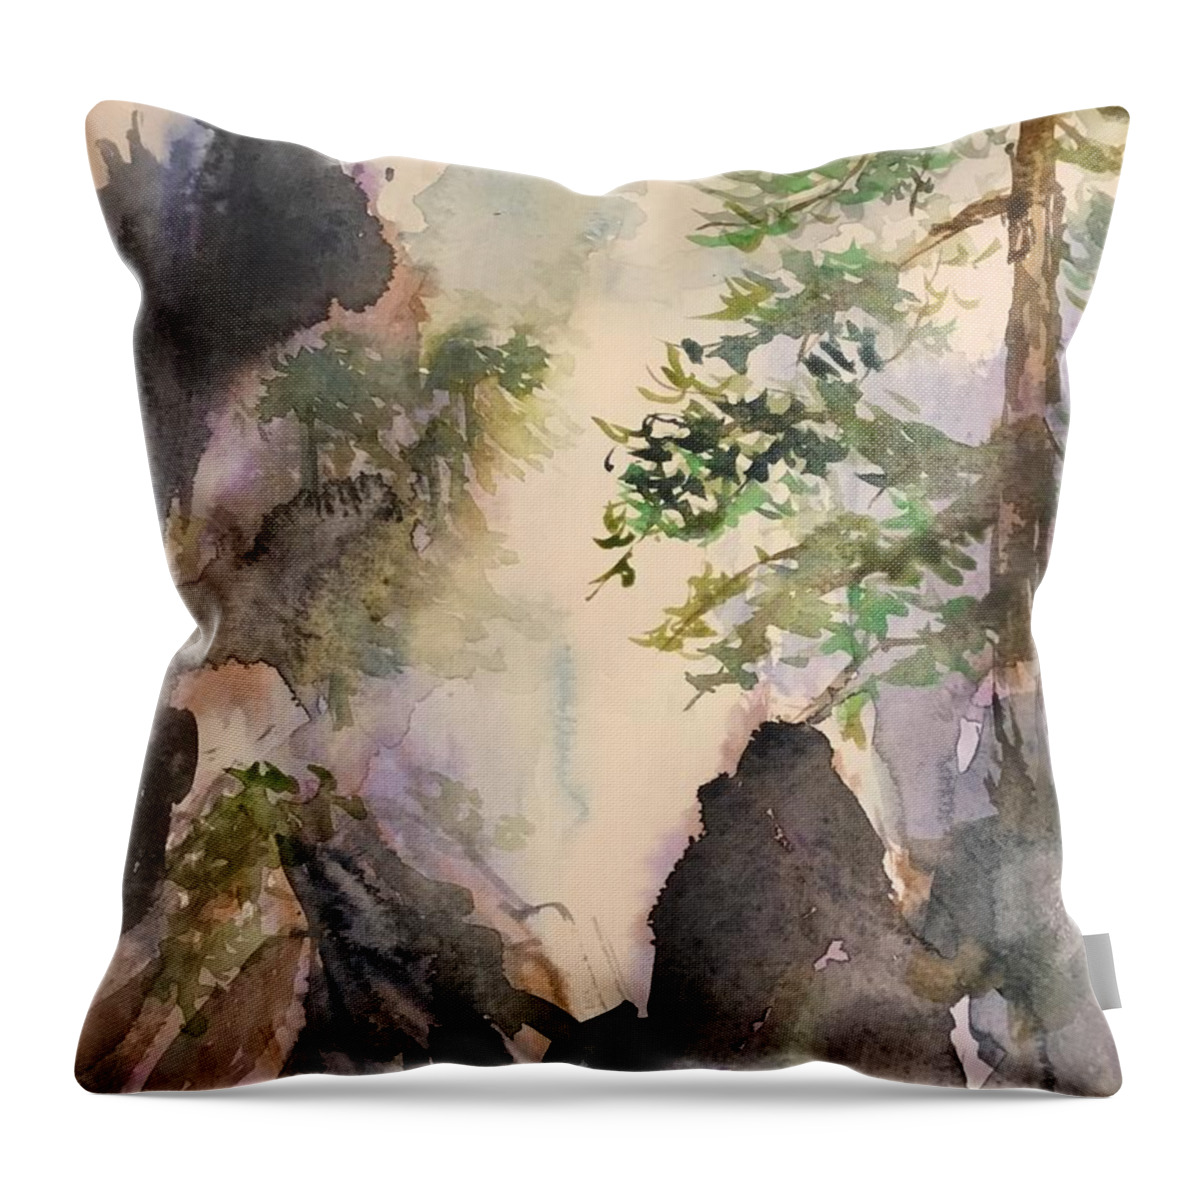 1352019 Throw Pillow featuring the painting 1352019 by Han in Huang wong